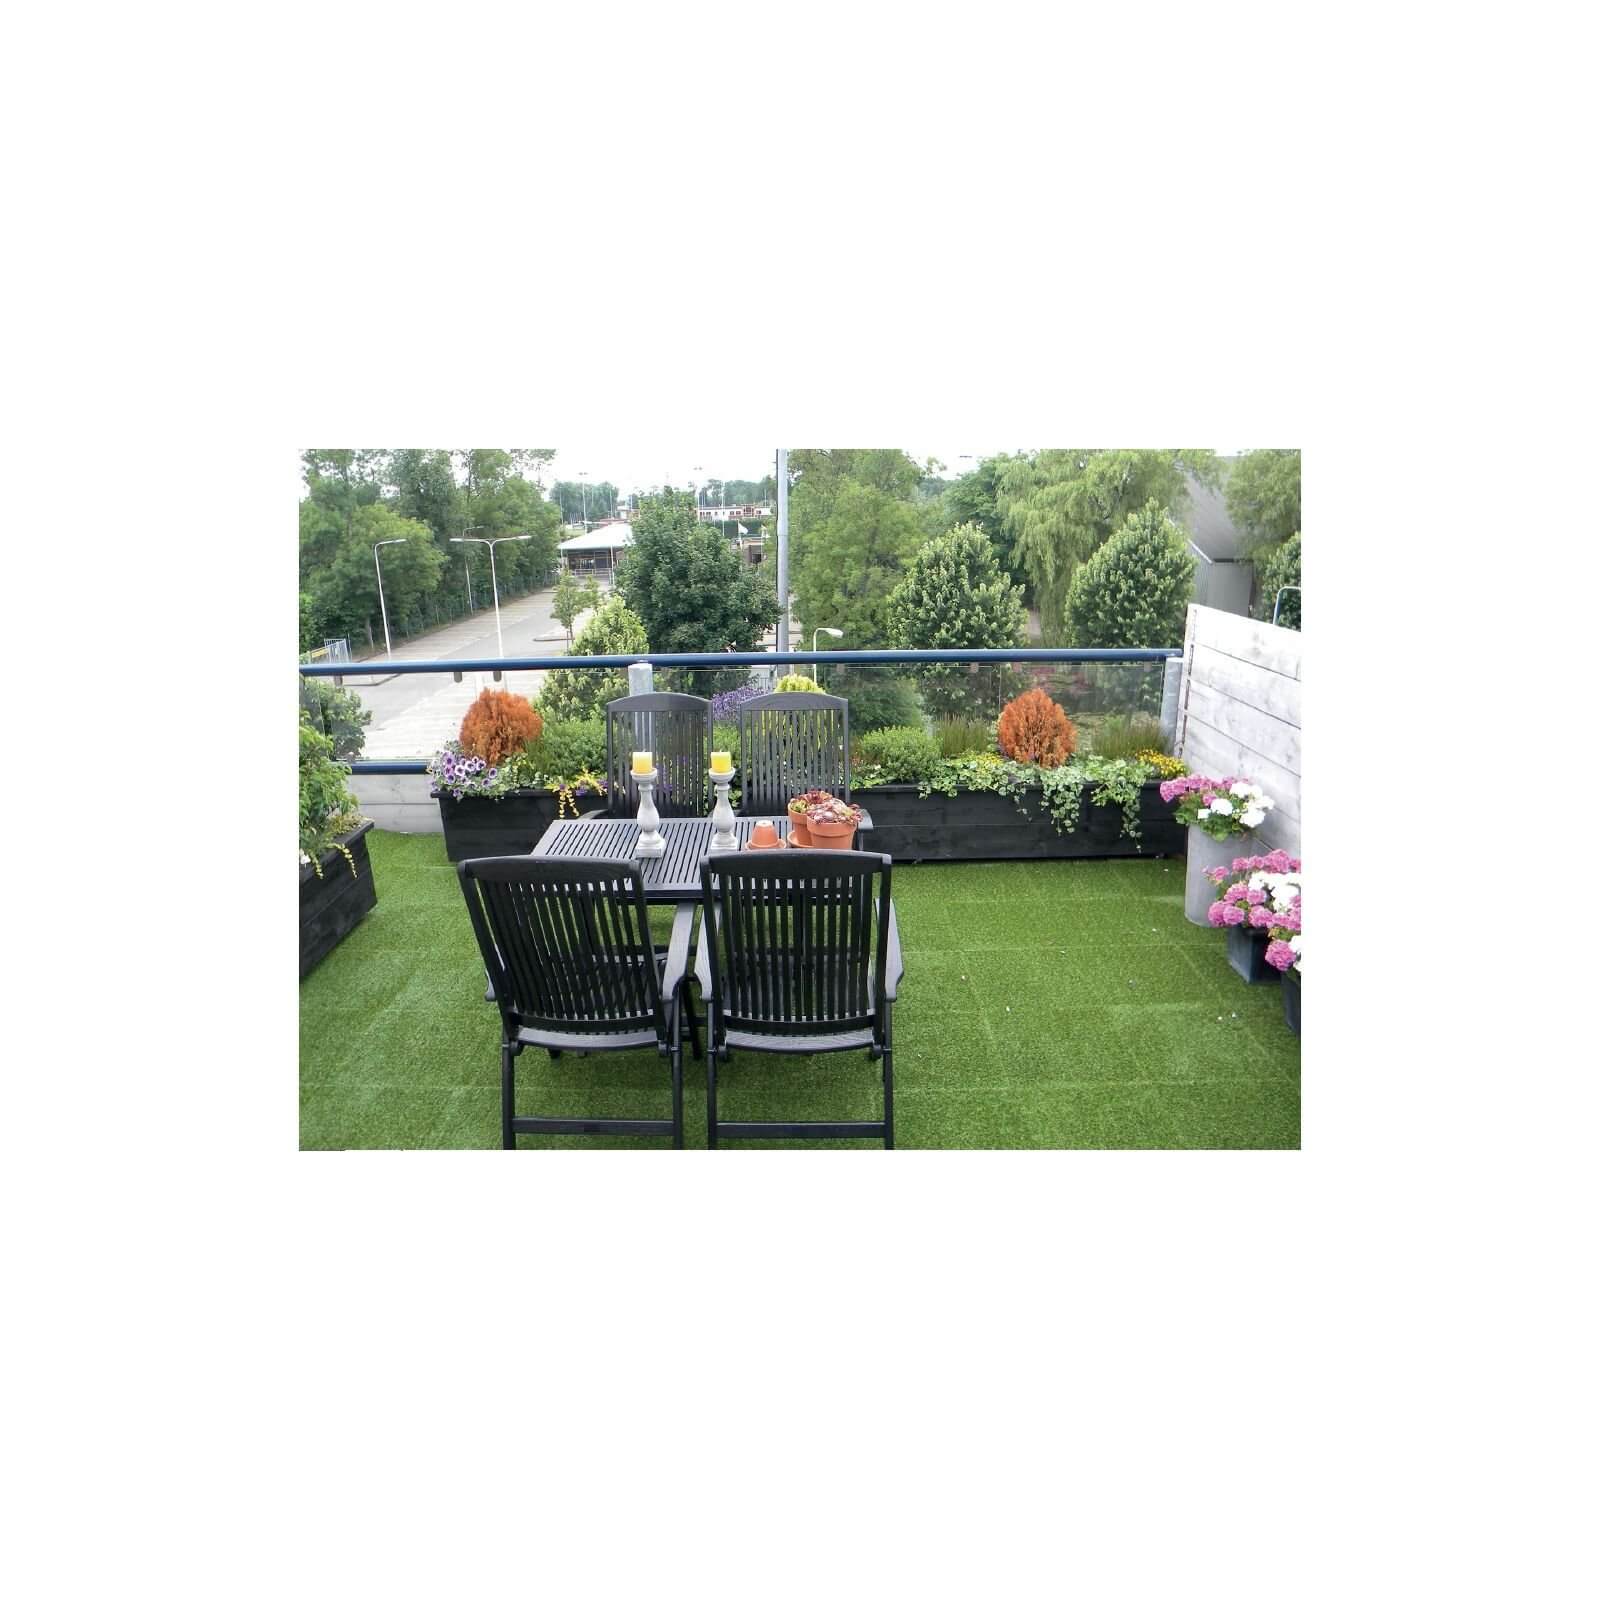 Aslon Rubber Tile with Grass - 400mm